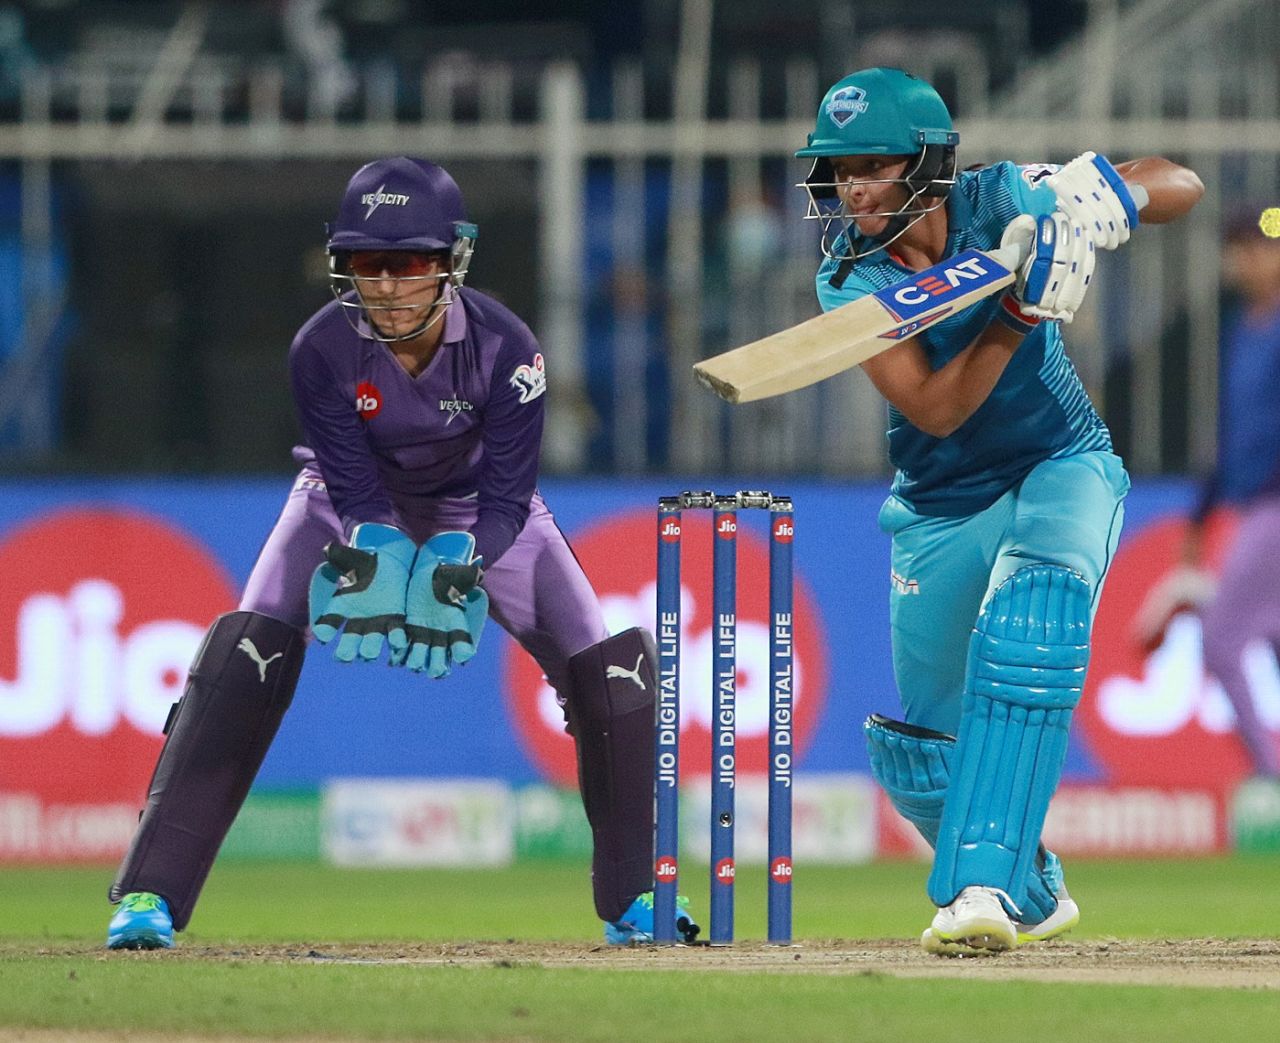 Harmanpreet Kaur was positive from the time she walked out, Supernovas vs Velocity, Women's T20 Challenge, Sharjah, November 4, 2020